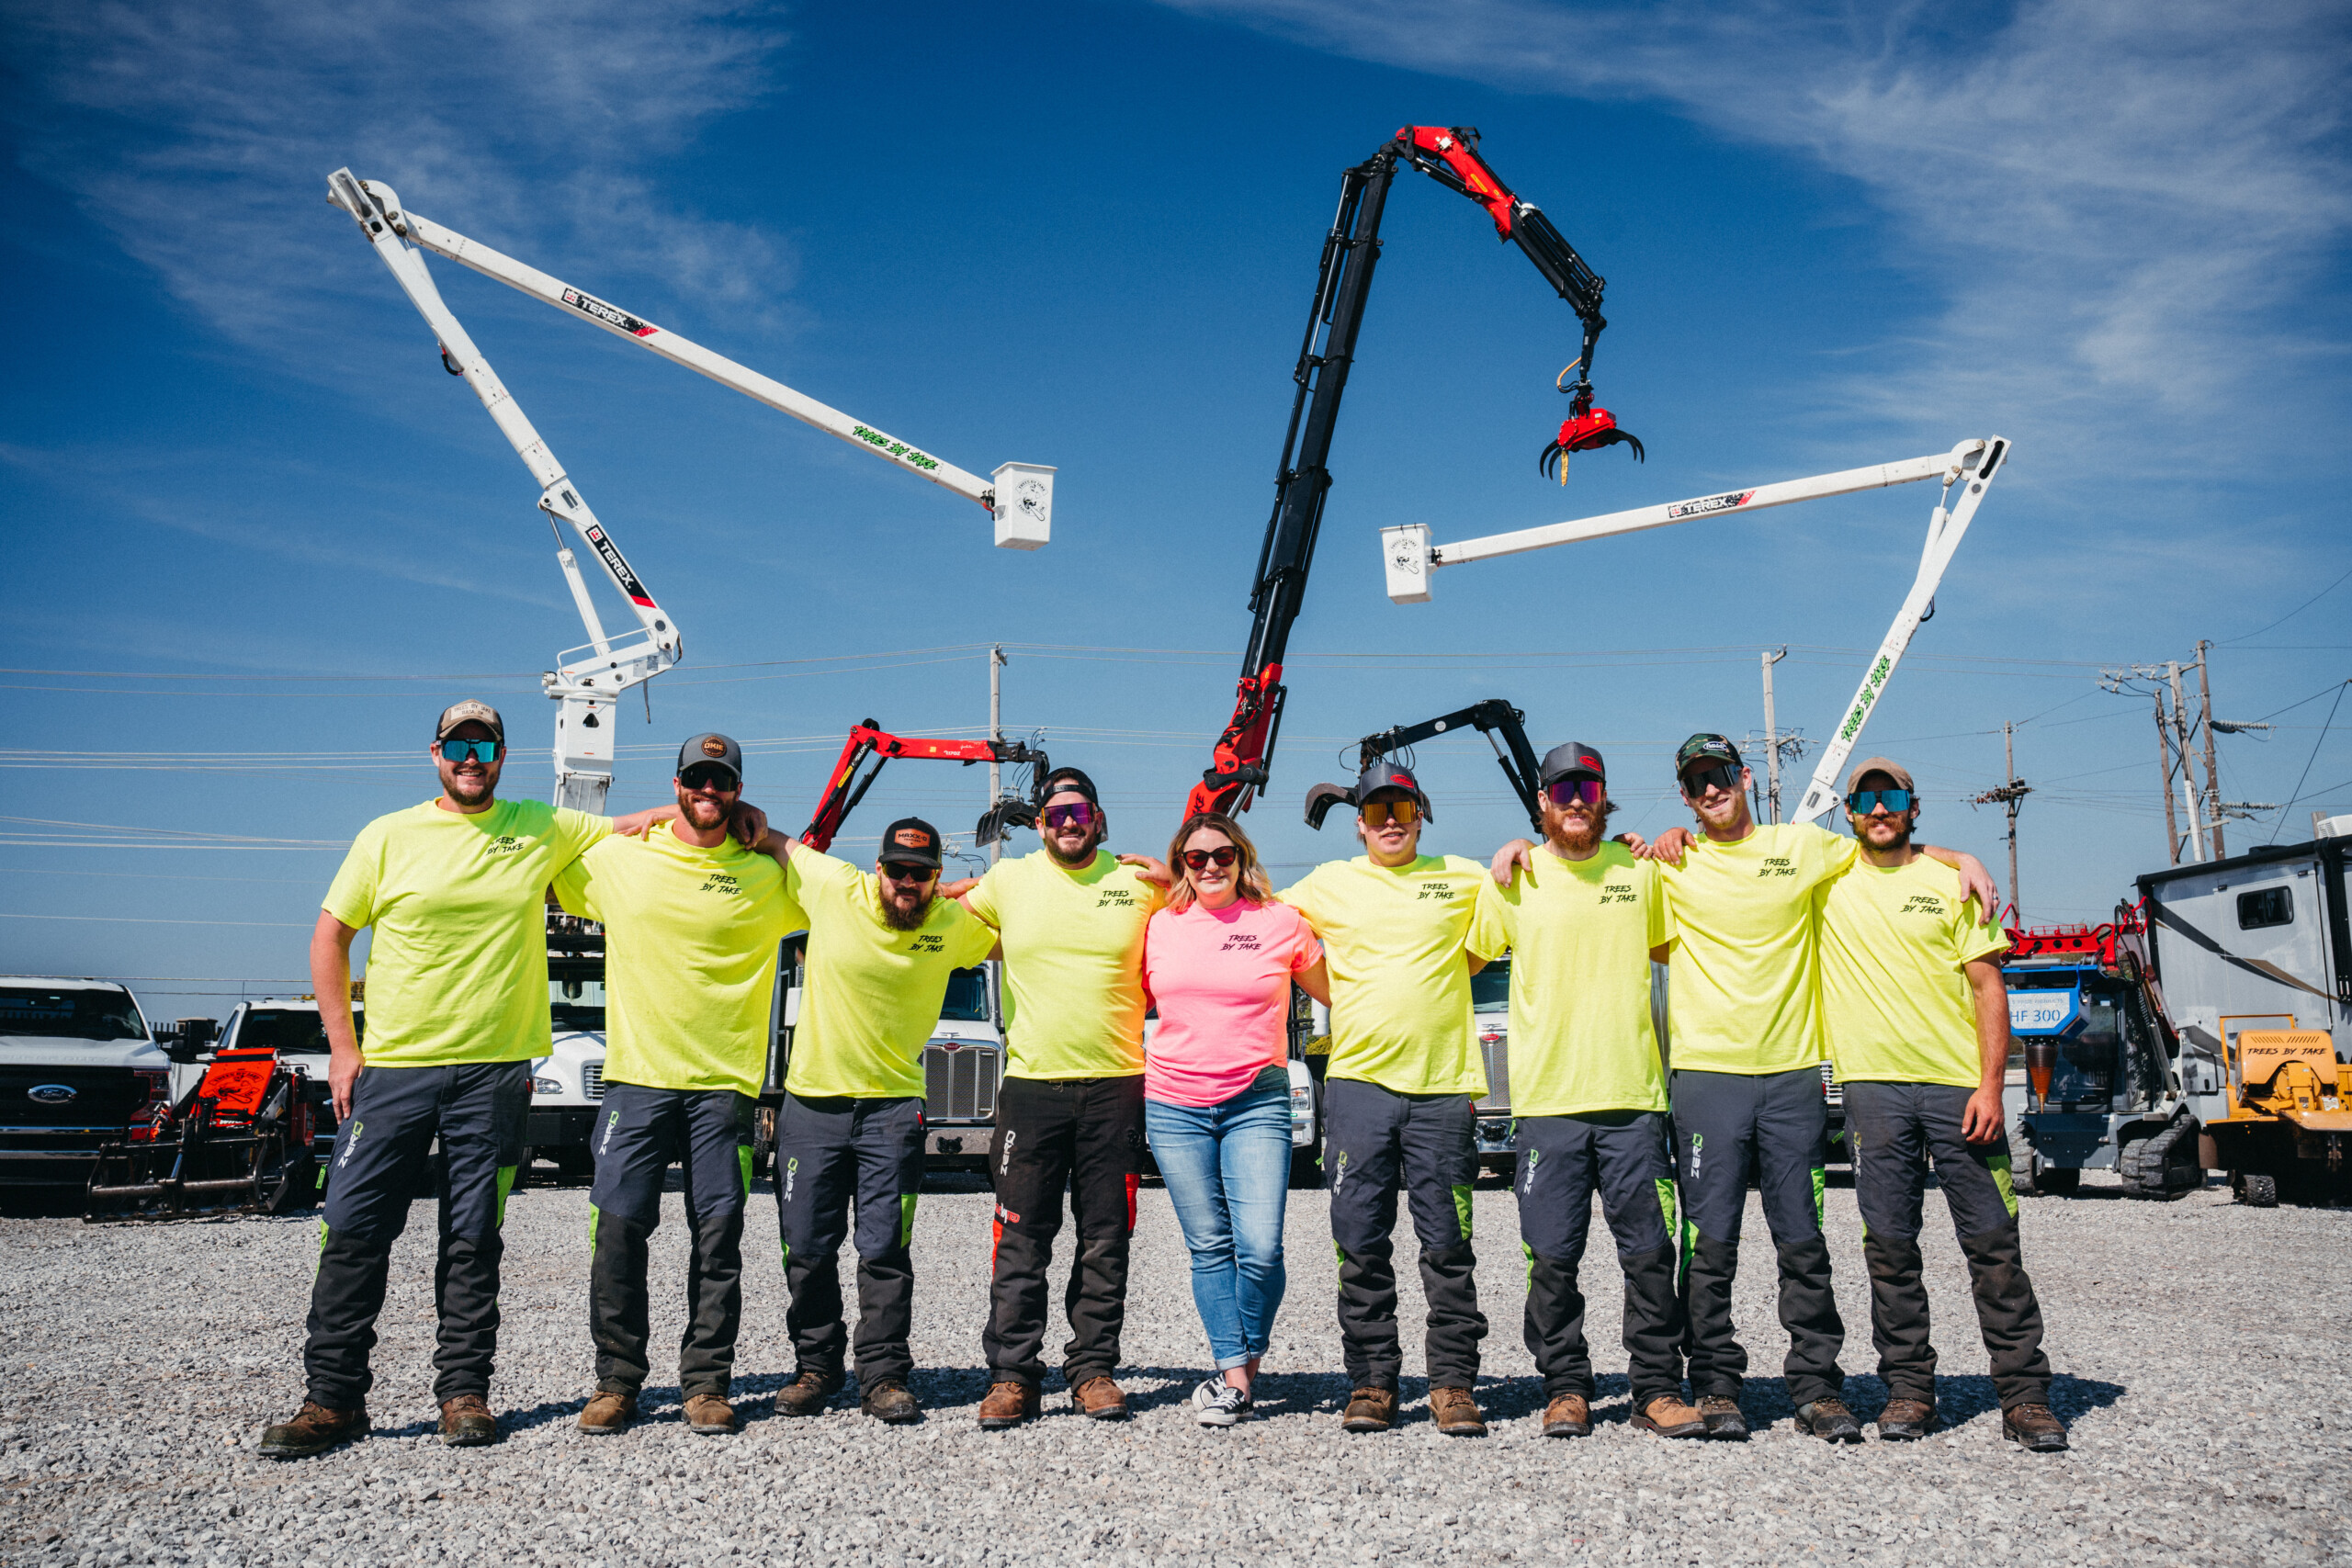 Group of workers in neon yellow shirts standing in front of large cranes in an industrial area under clear blue sky.